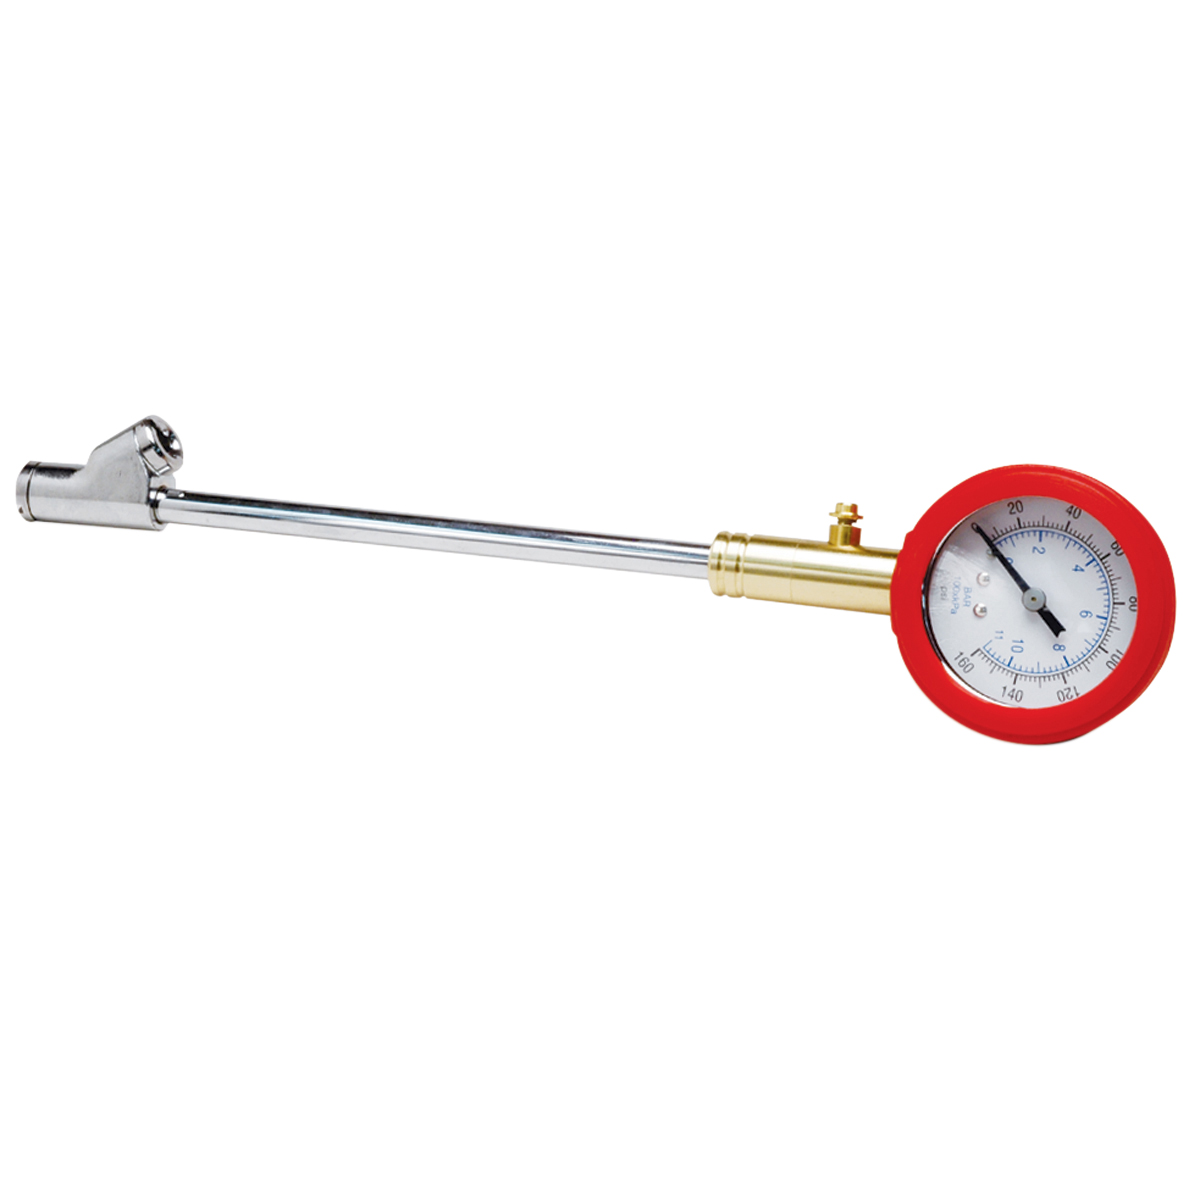 160 PSI DIAL TIRE GAUGE STRAIGHT CHUCK